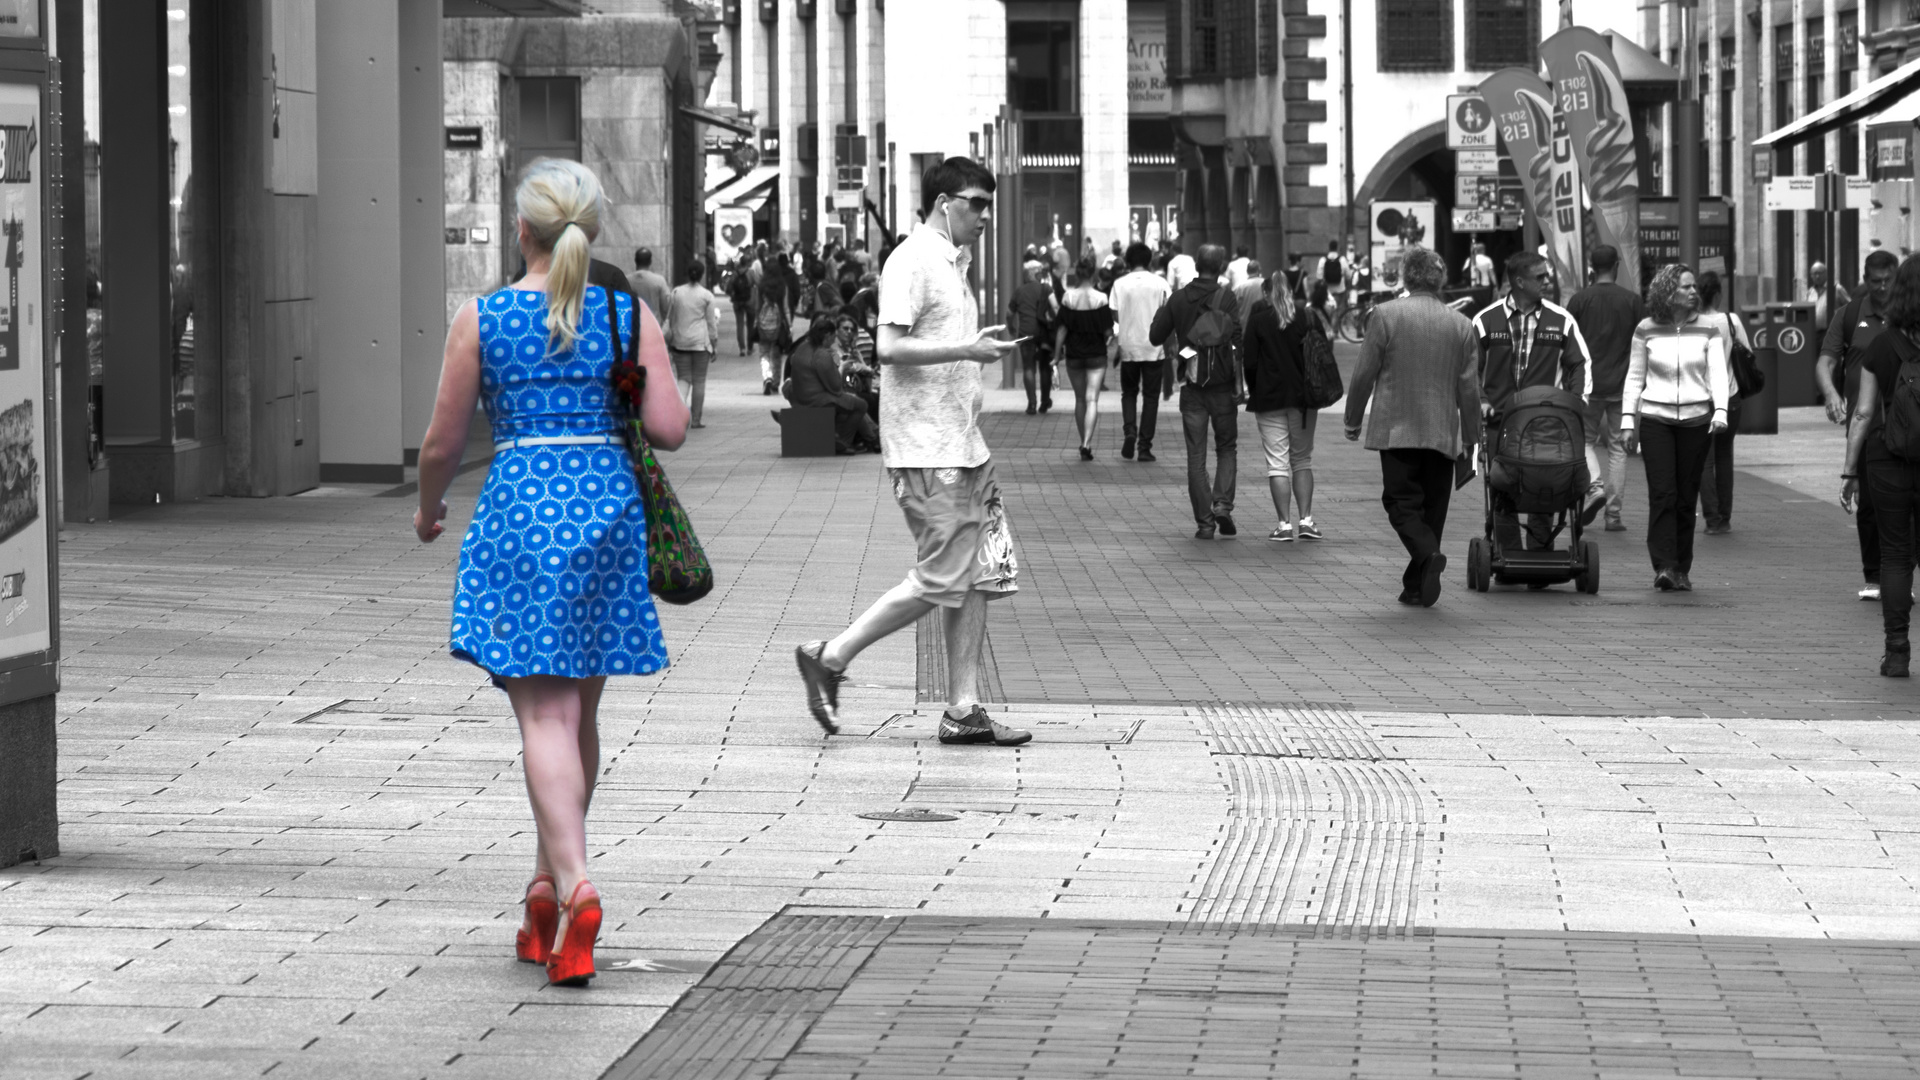 Lady in blue with red shoe